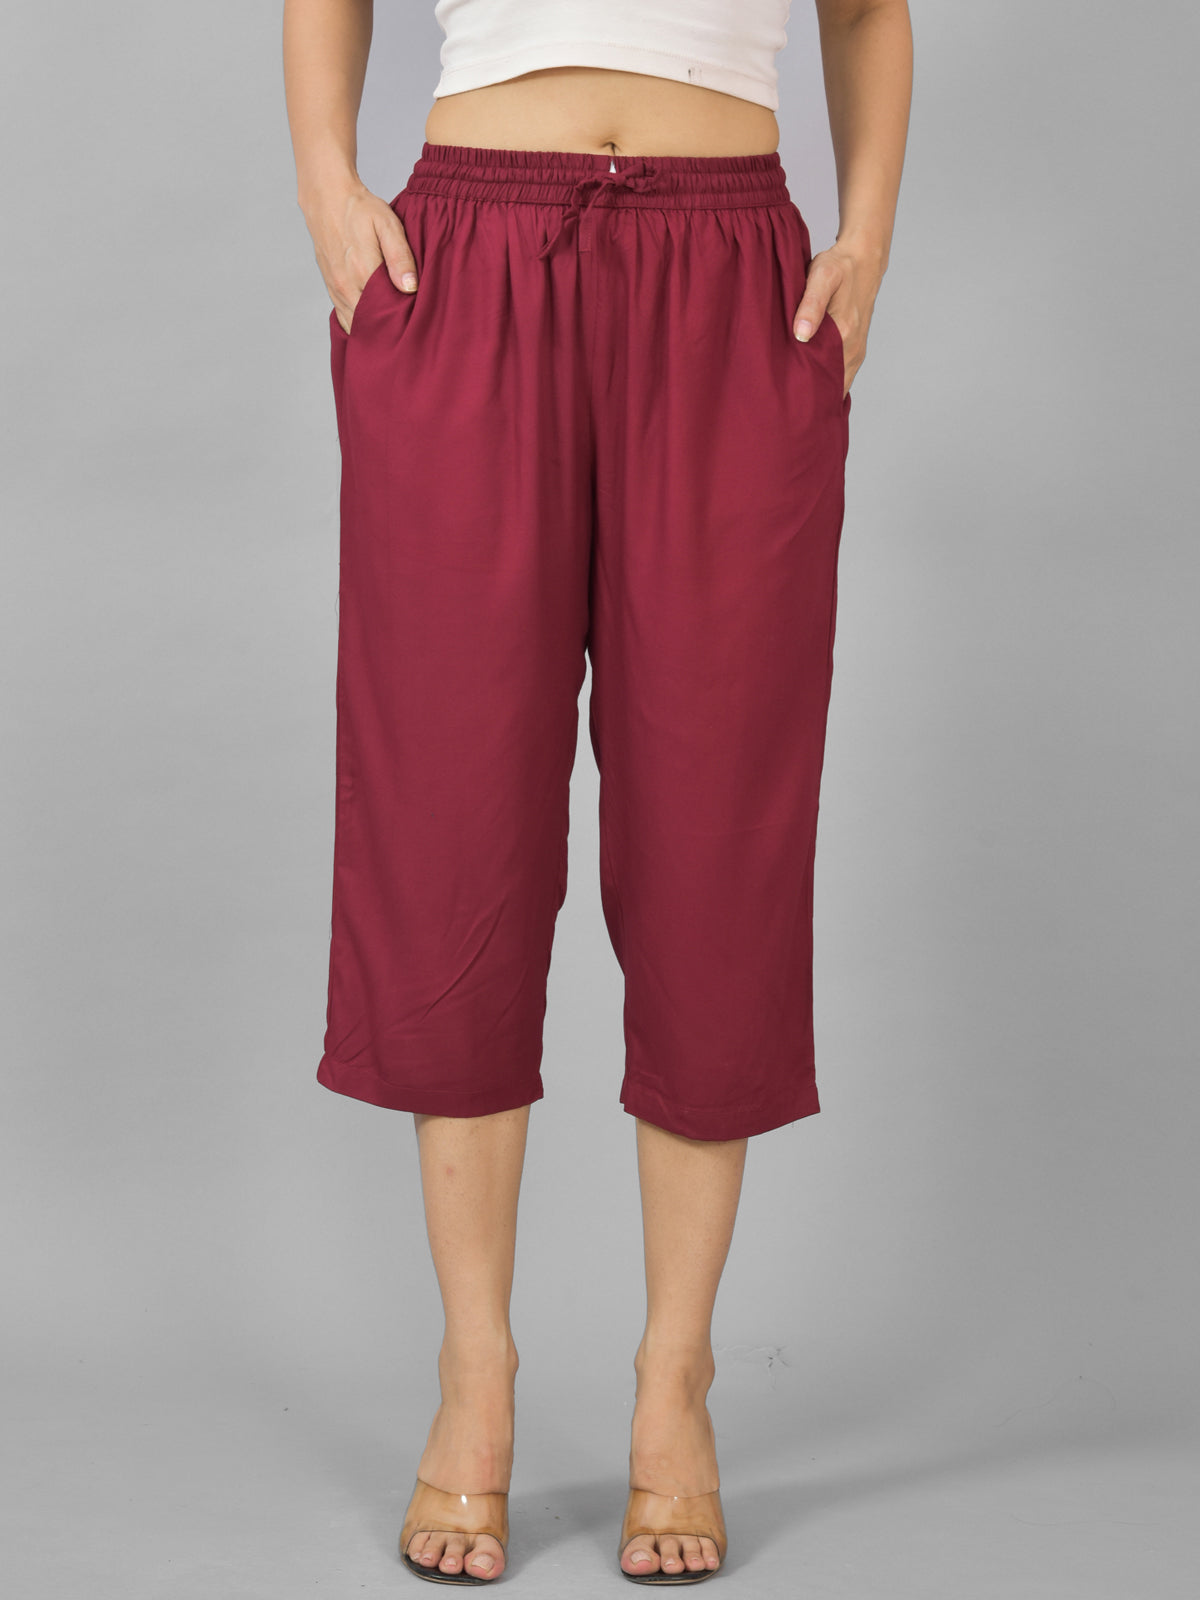 Pack Of 2 Womens Beige And Wine Calf Length Rayon Culottes Trouser Combo